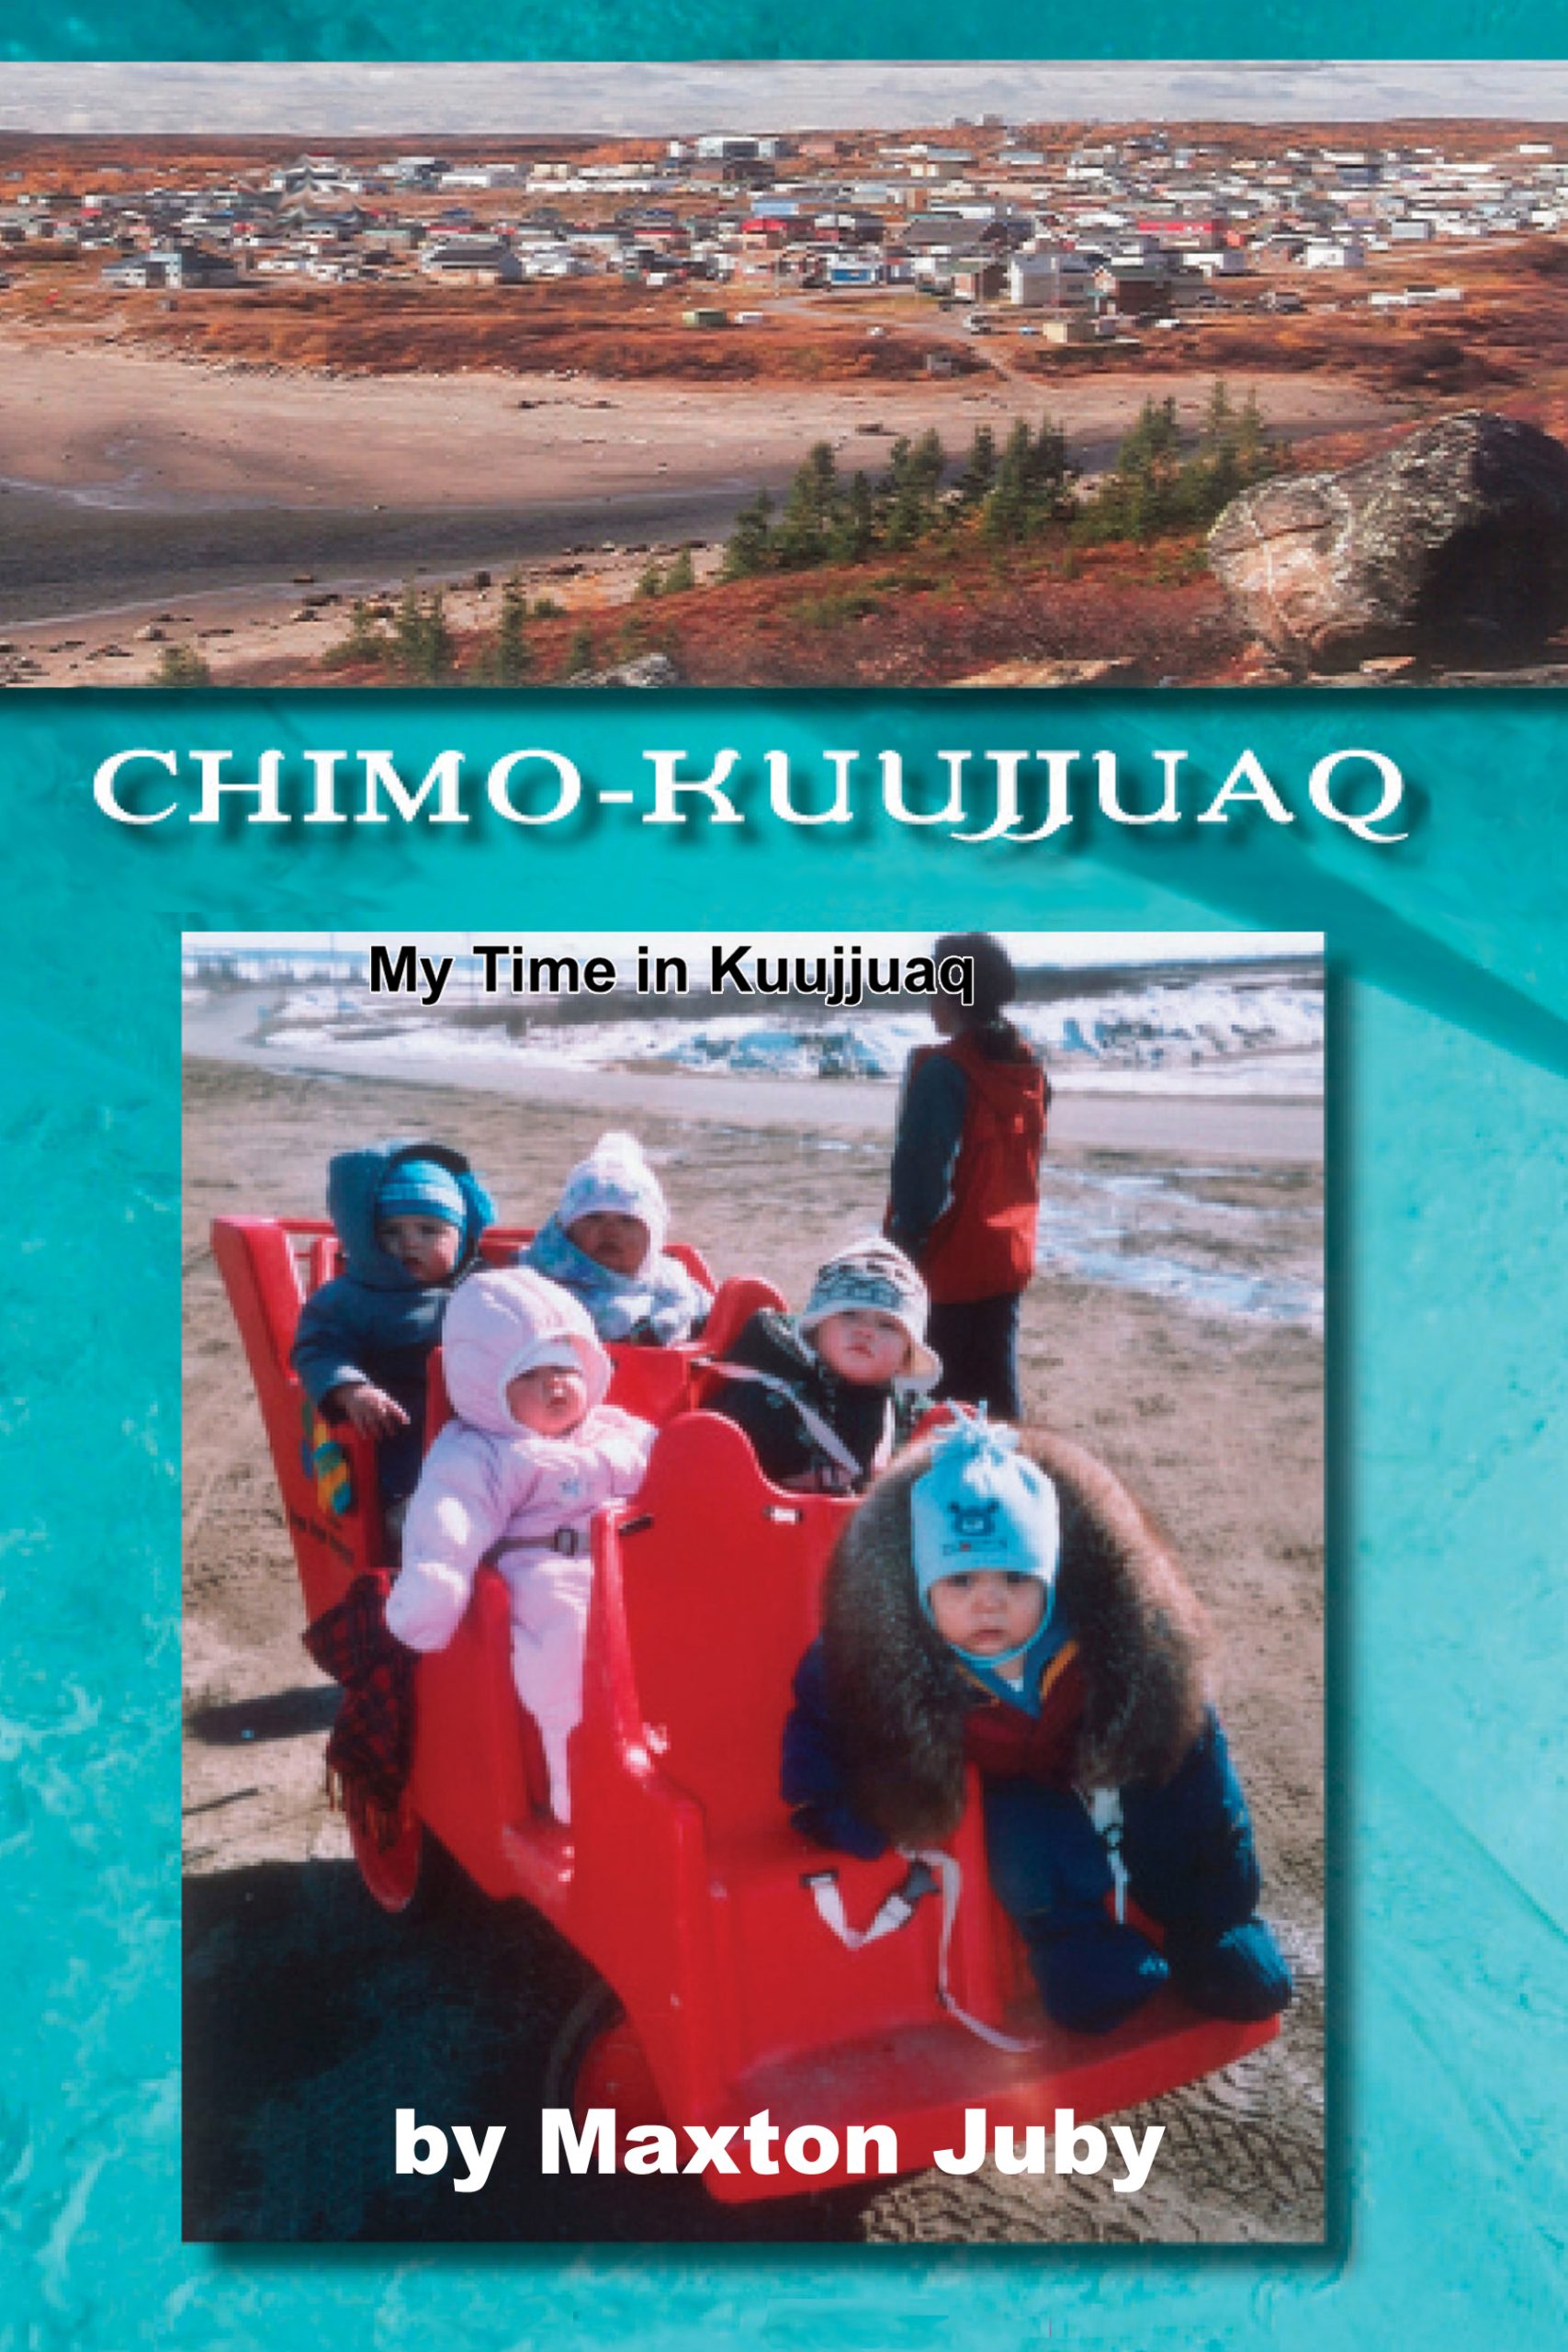 Chimo-Kuujjuaq - by Maxton Juby (front cover 2022)